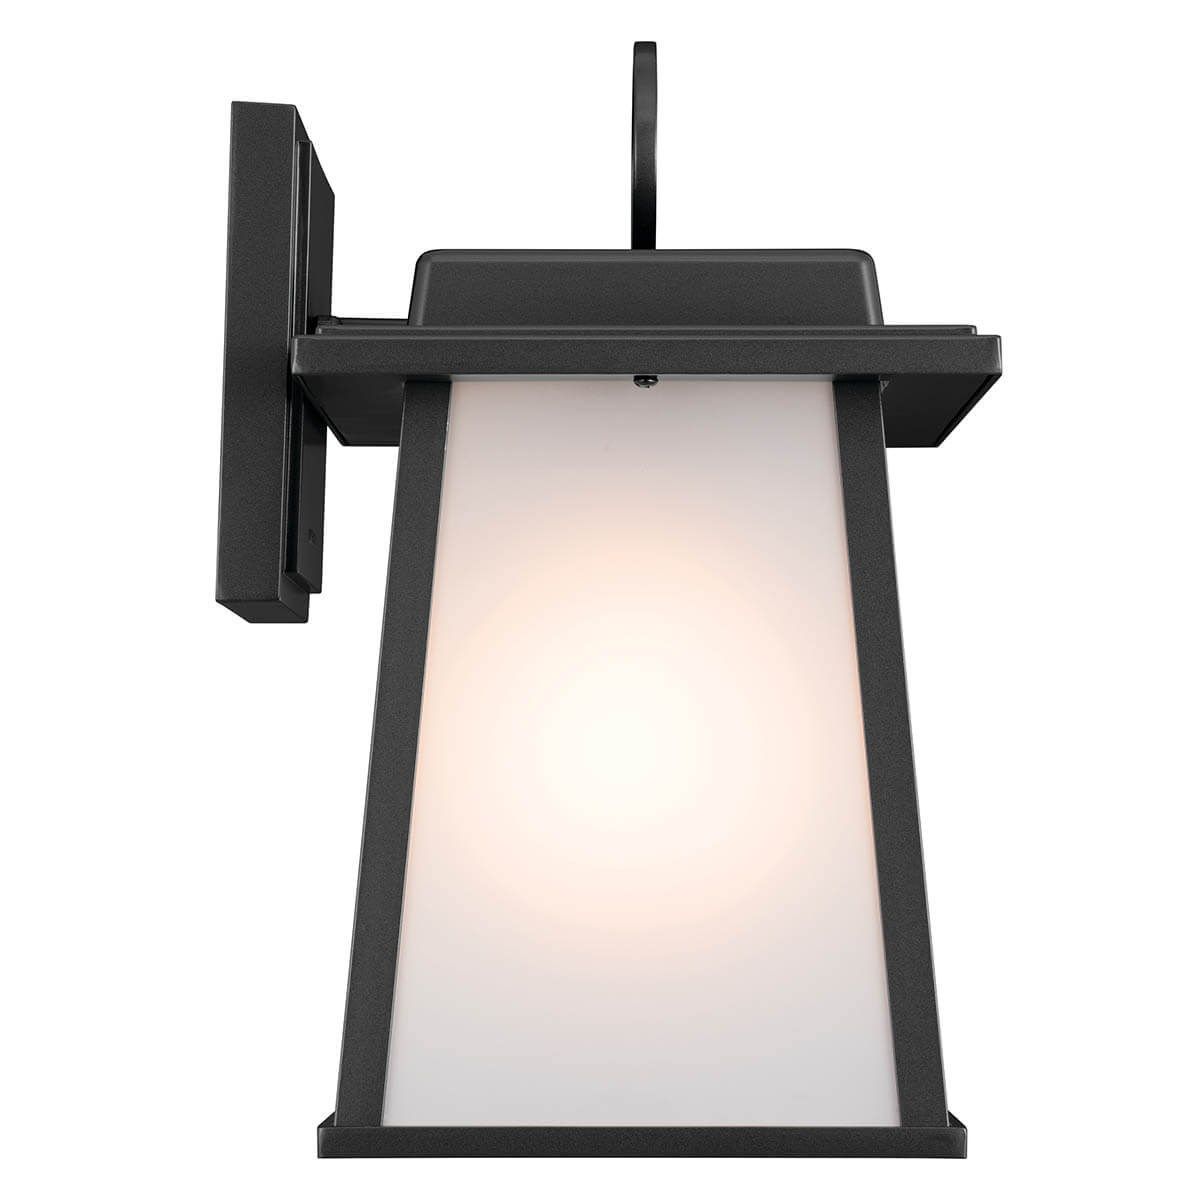 Noward 12 in. Outdoor Wall Sconce